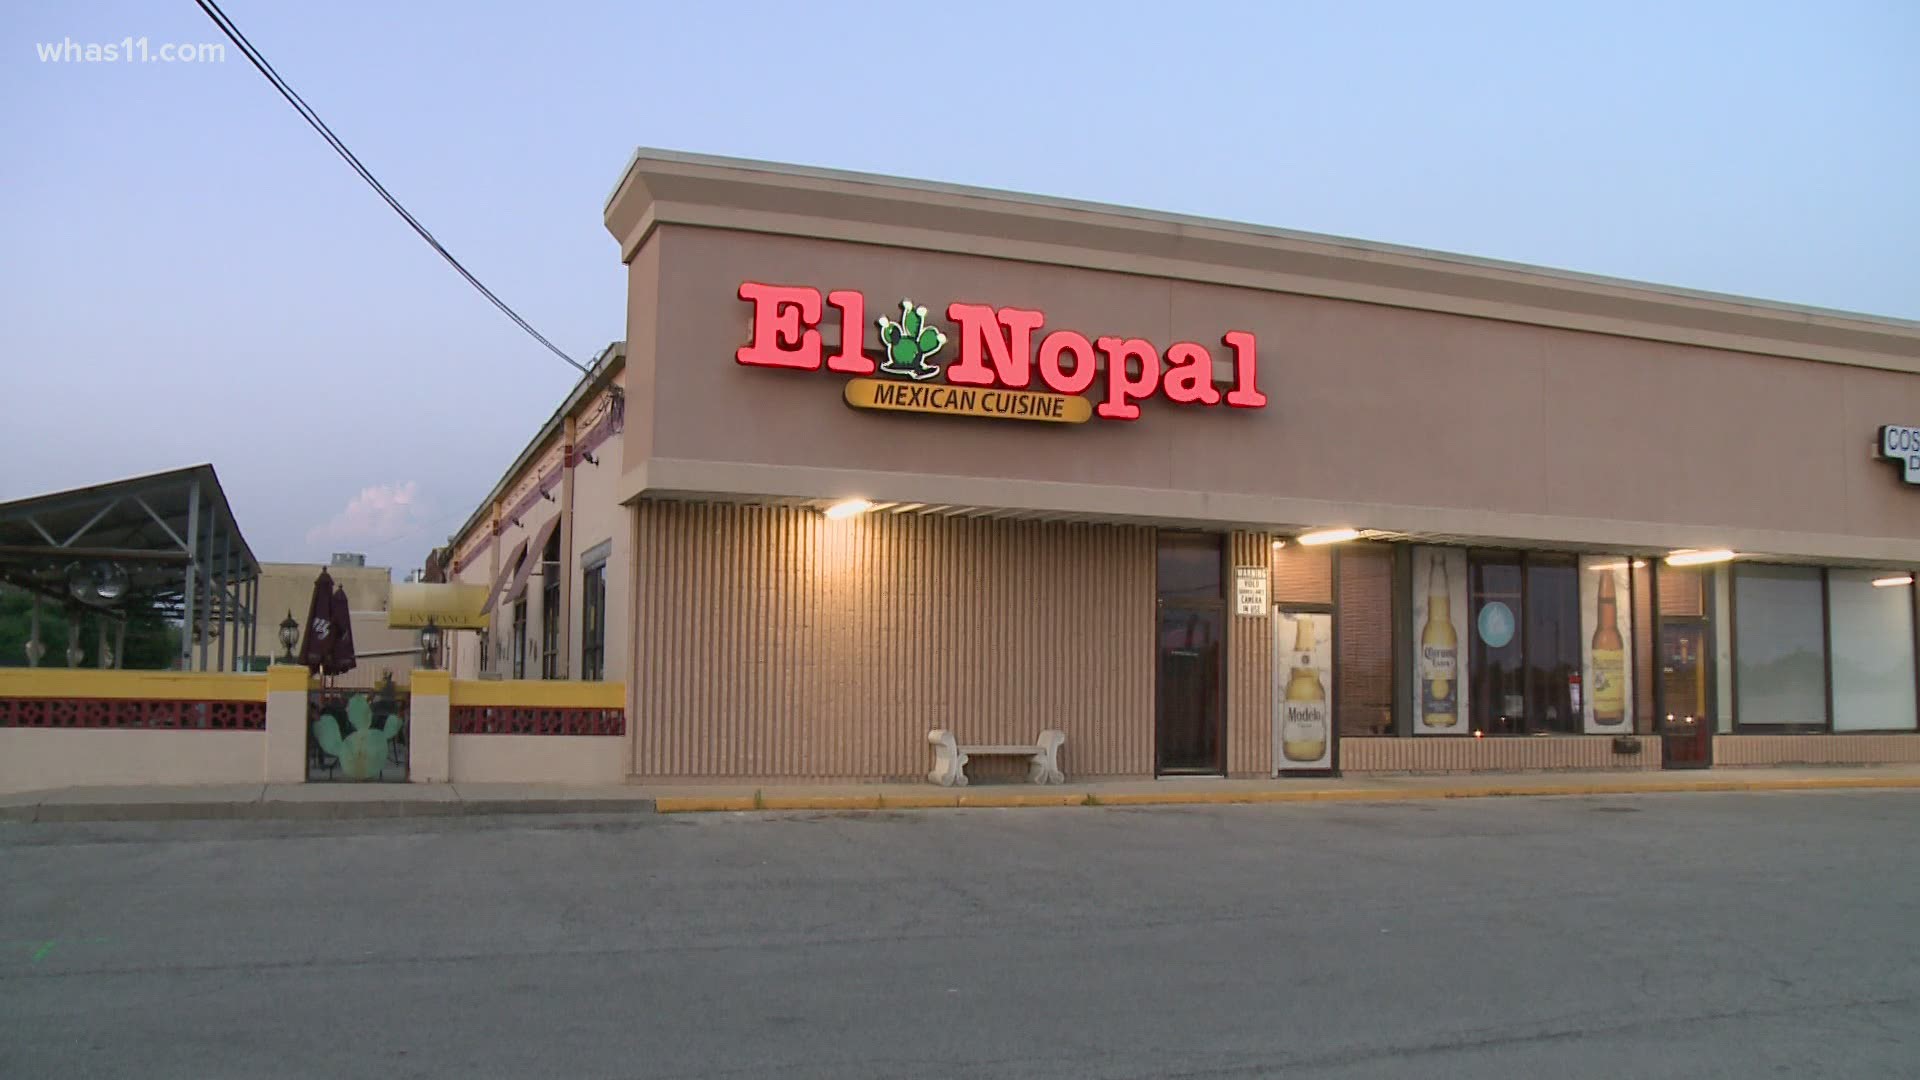 Metro Health officials said three people have tested positive for COVID-19 at El Nopal's Westport Road location.